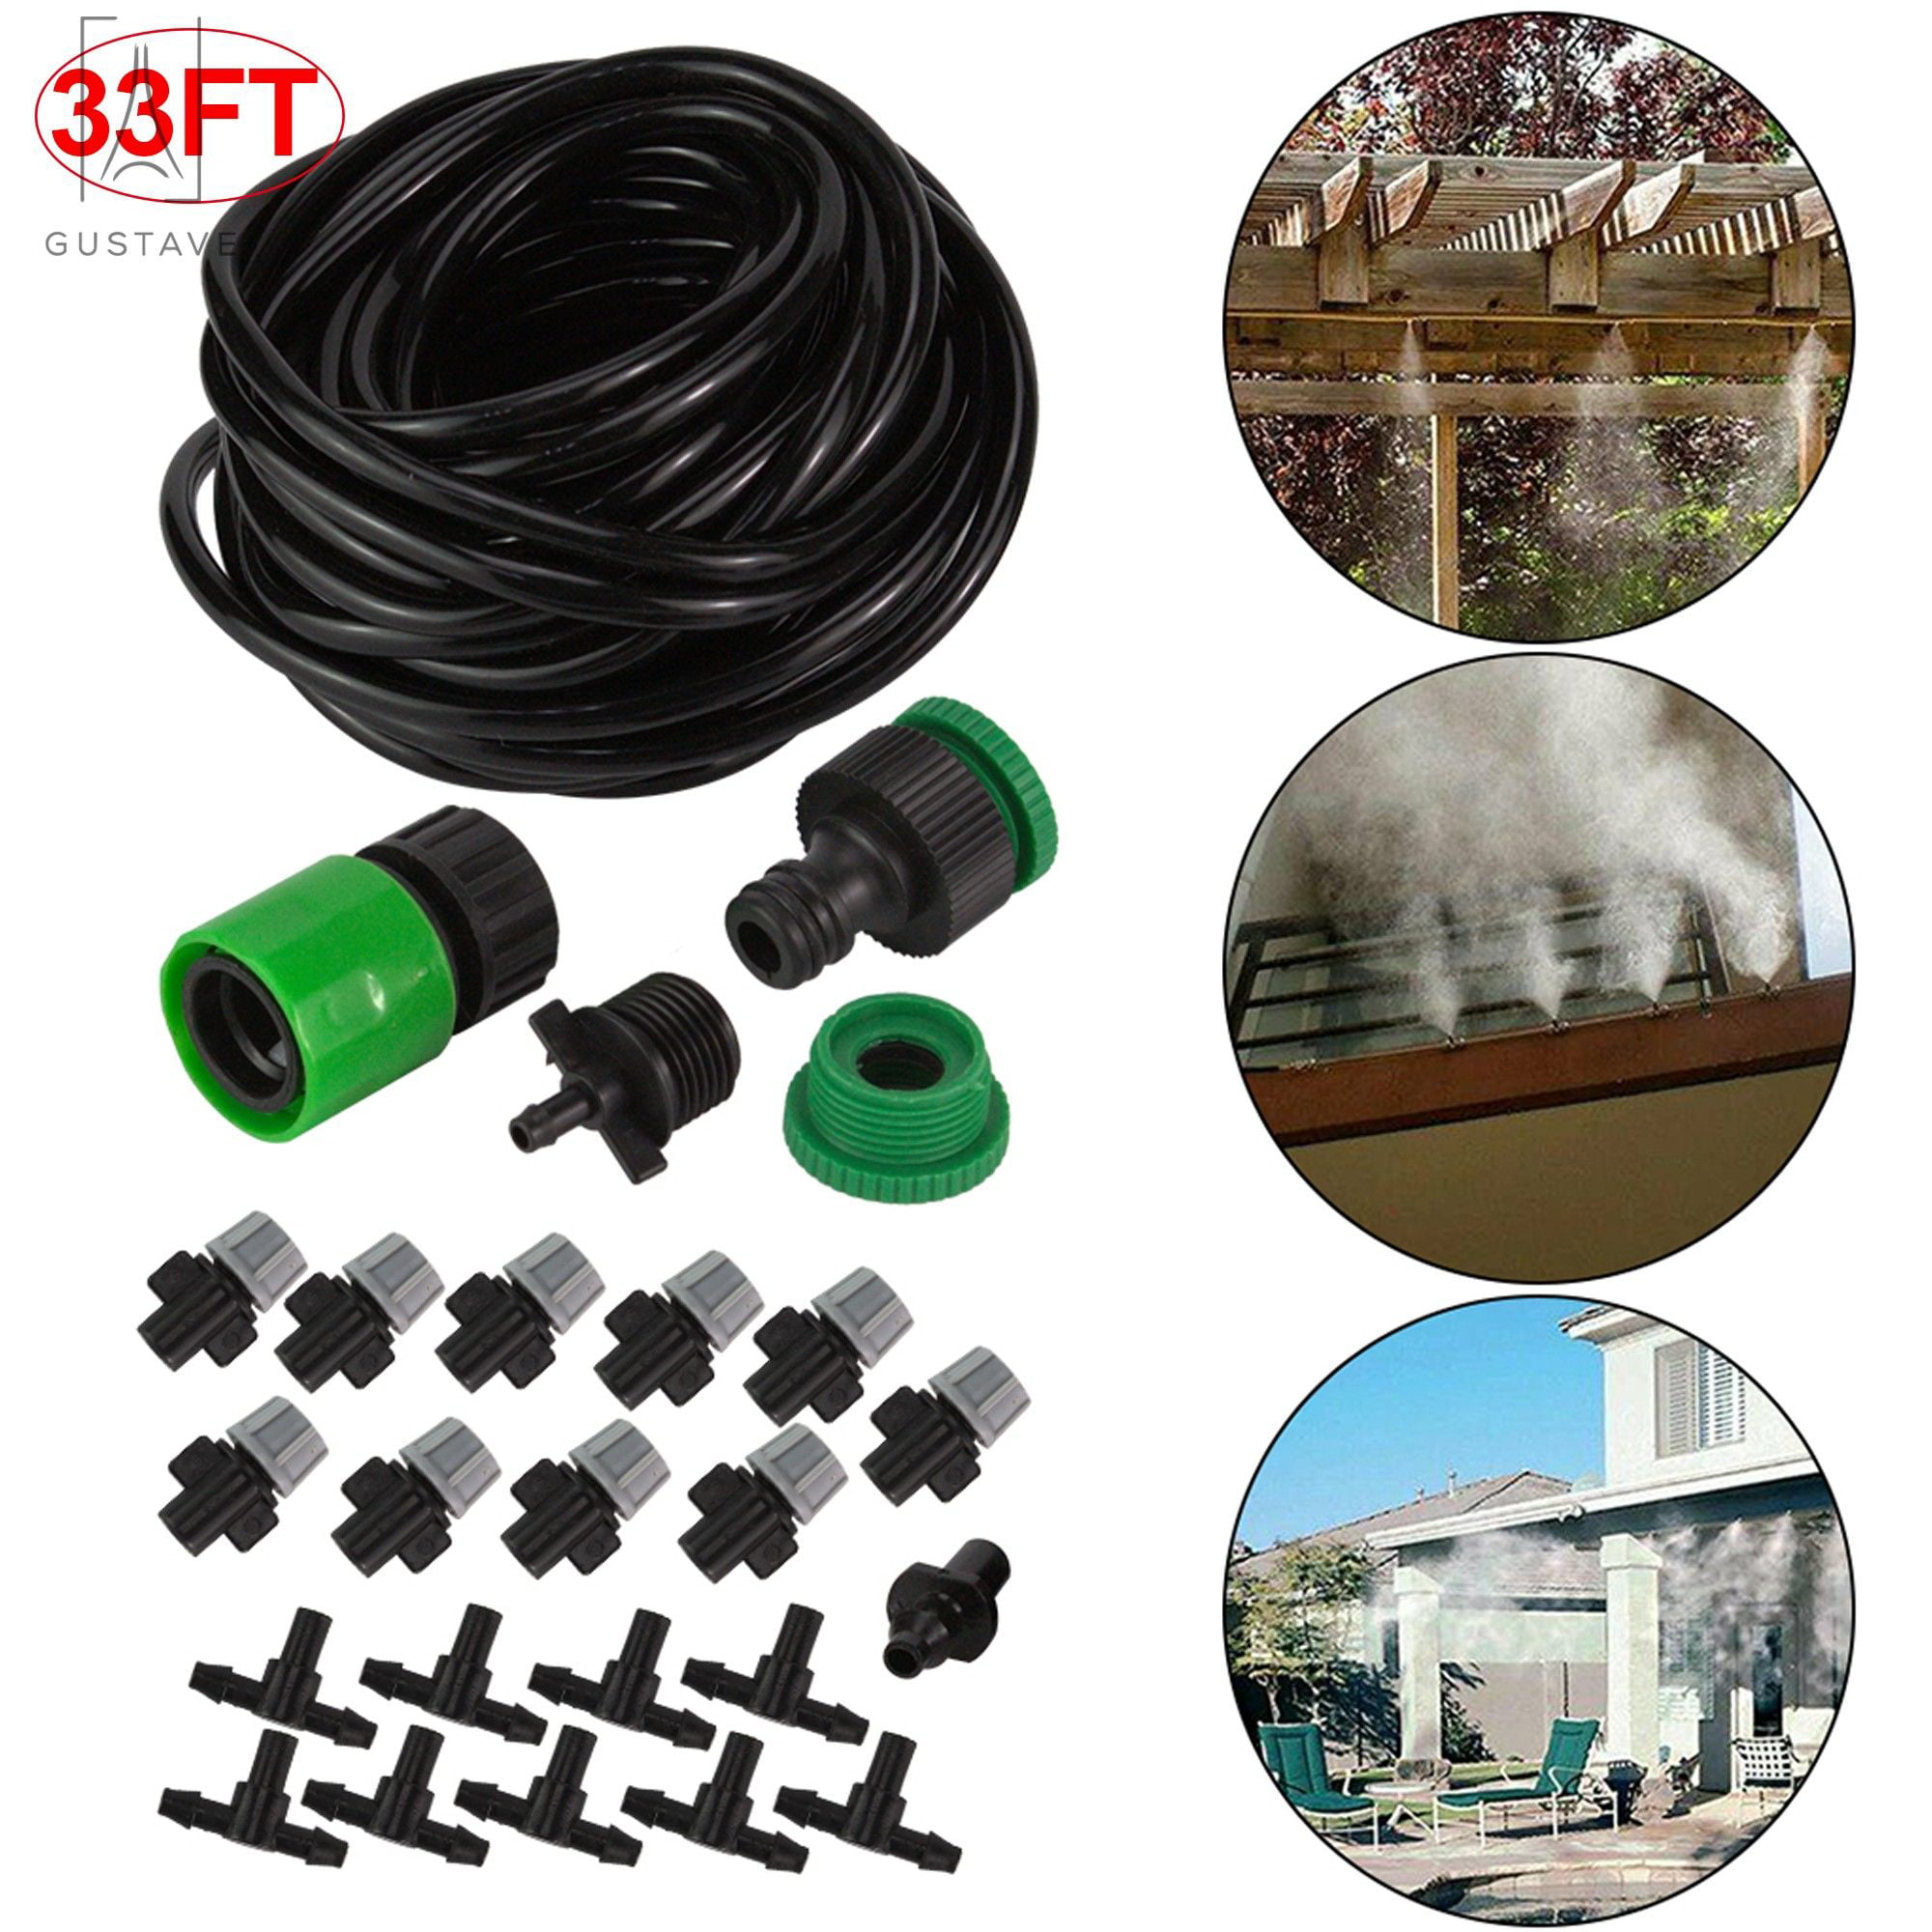 5M Air Misting Cooling Plant Irrigation System Garden Patio Water Nozzles Kits 